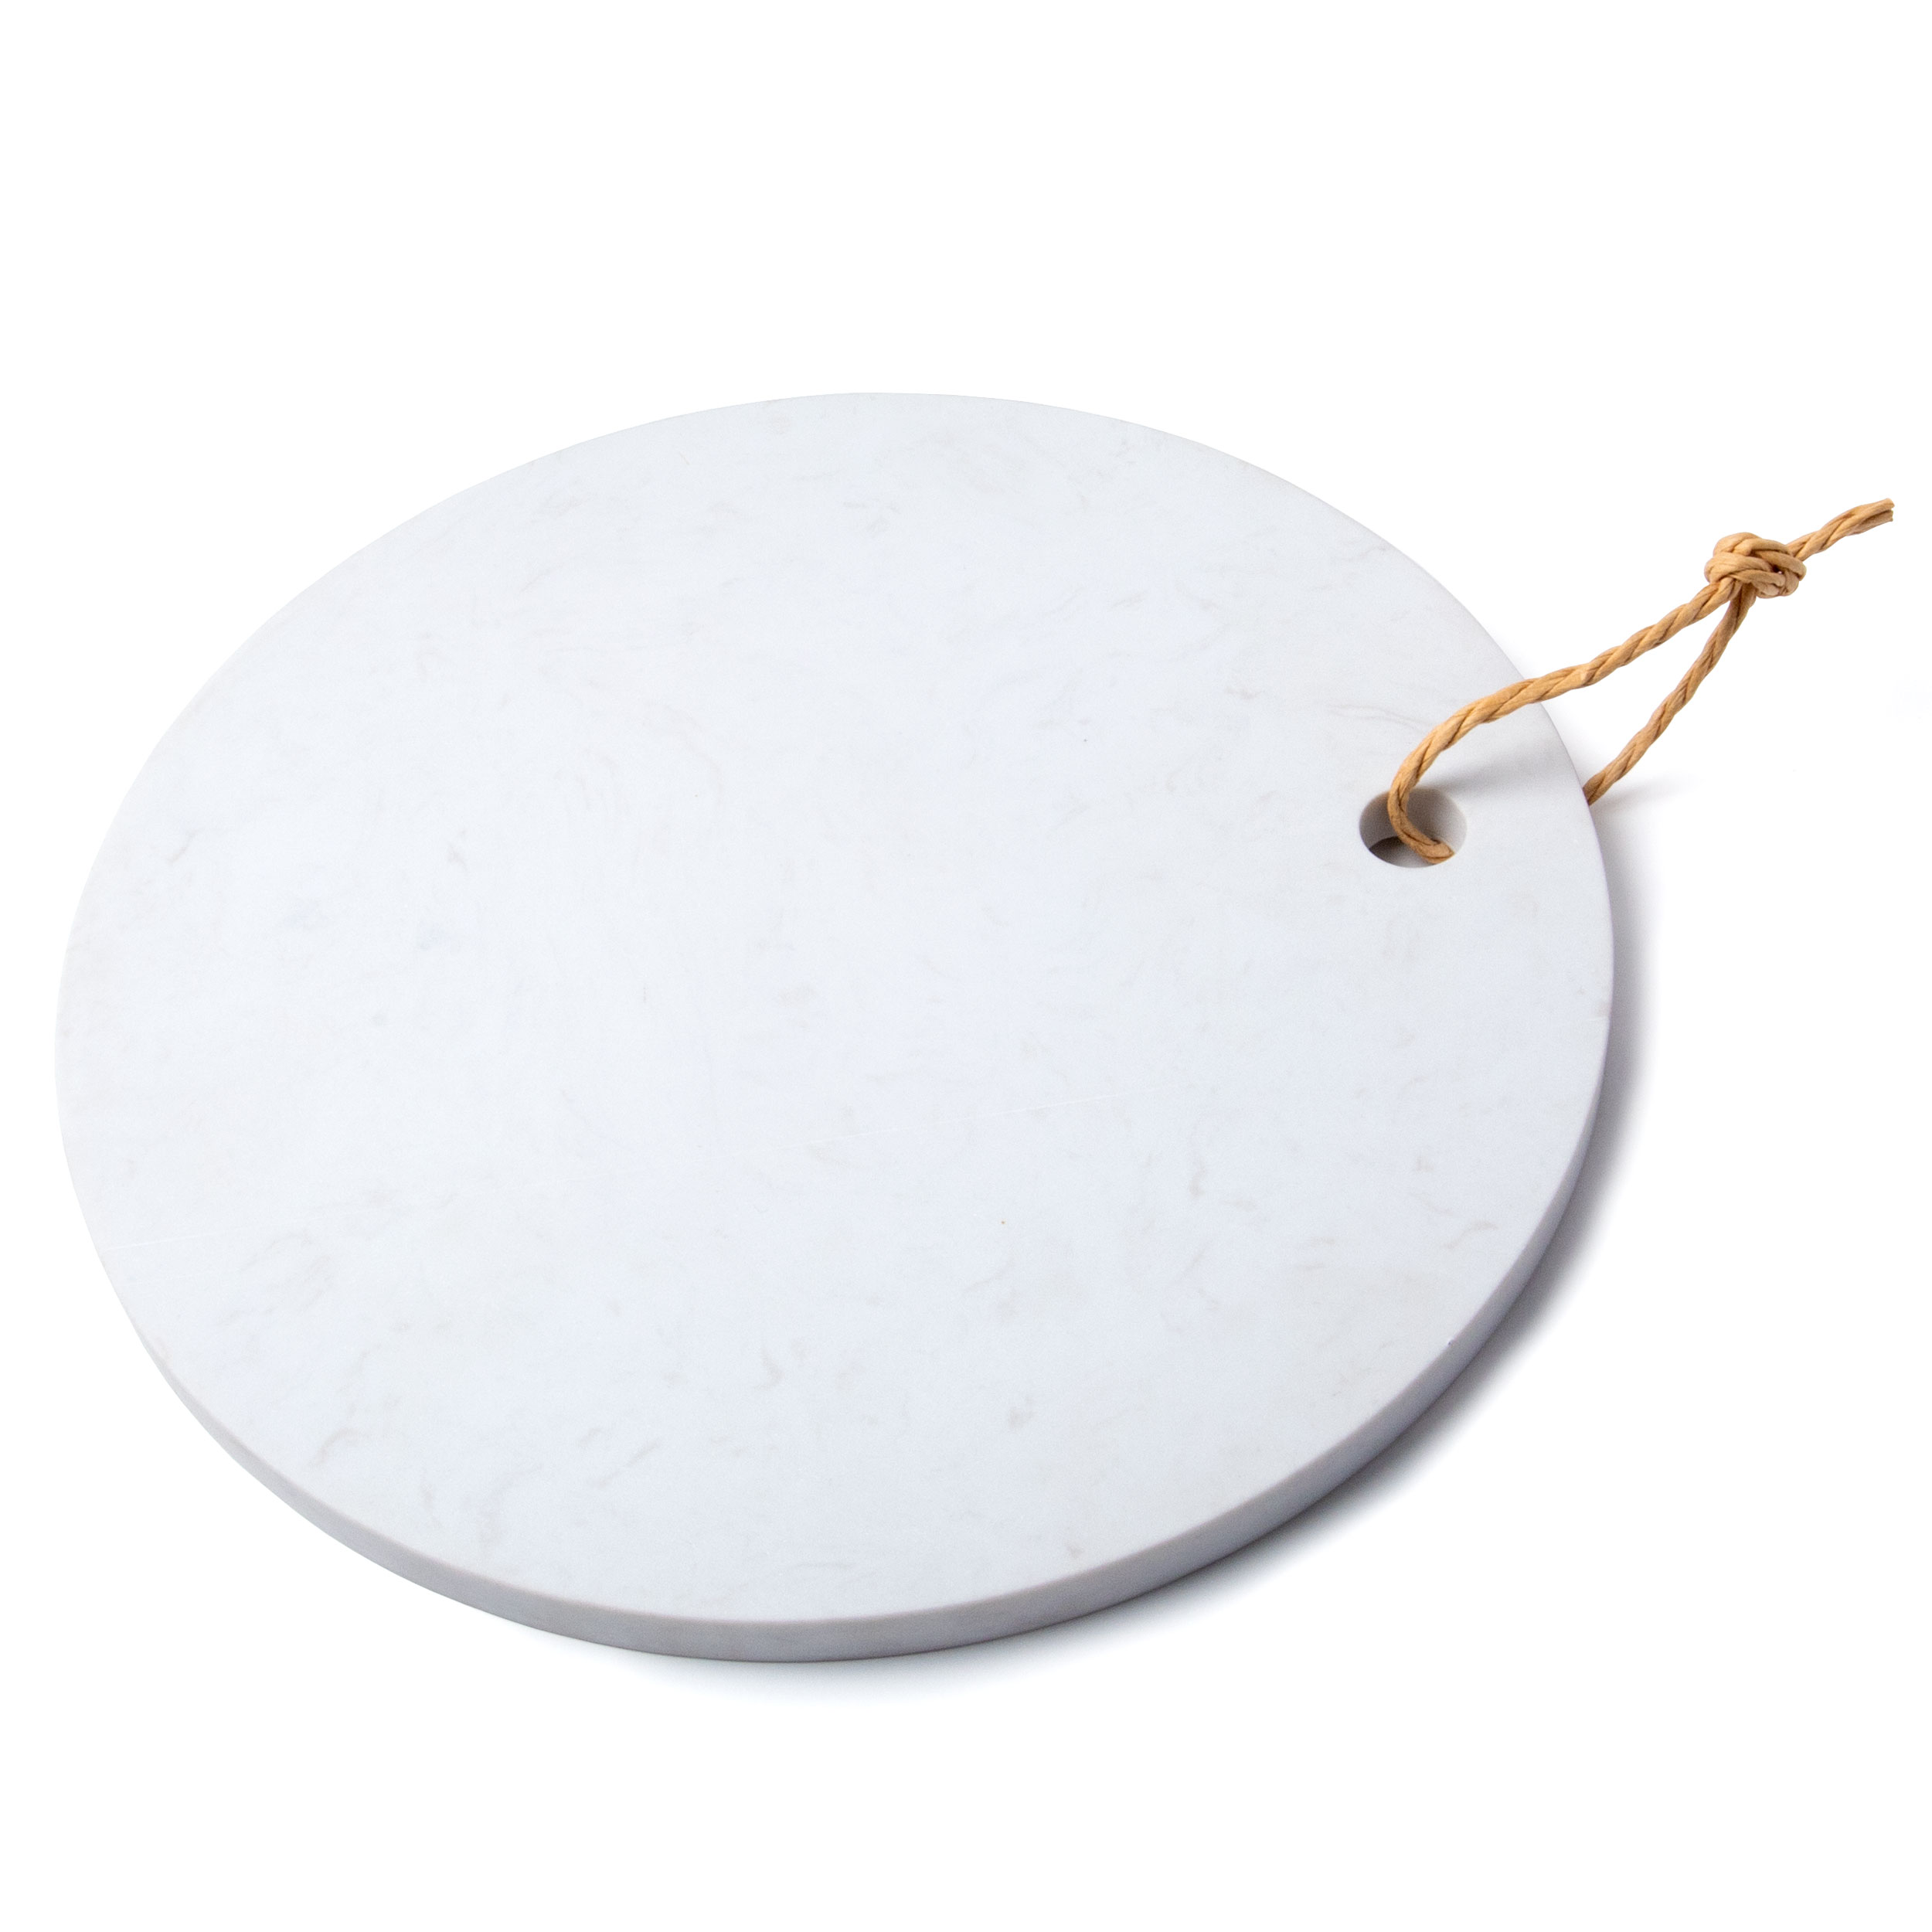 x 1 H Off-White 12 Diam Creative Home Natural Marble Round Board Cheese Dessert Fruit Serving Plate patterns may vary 